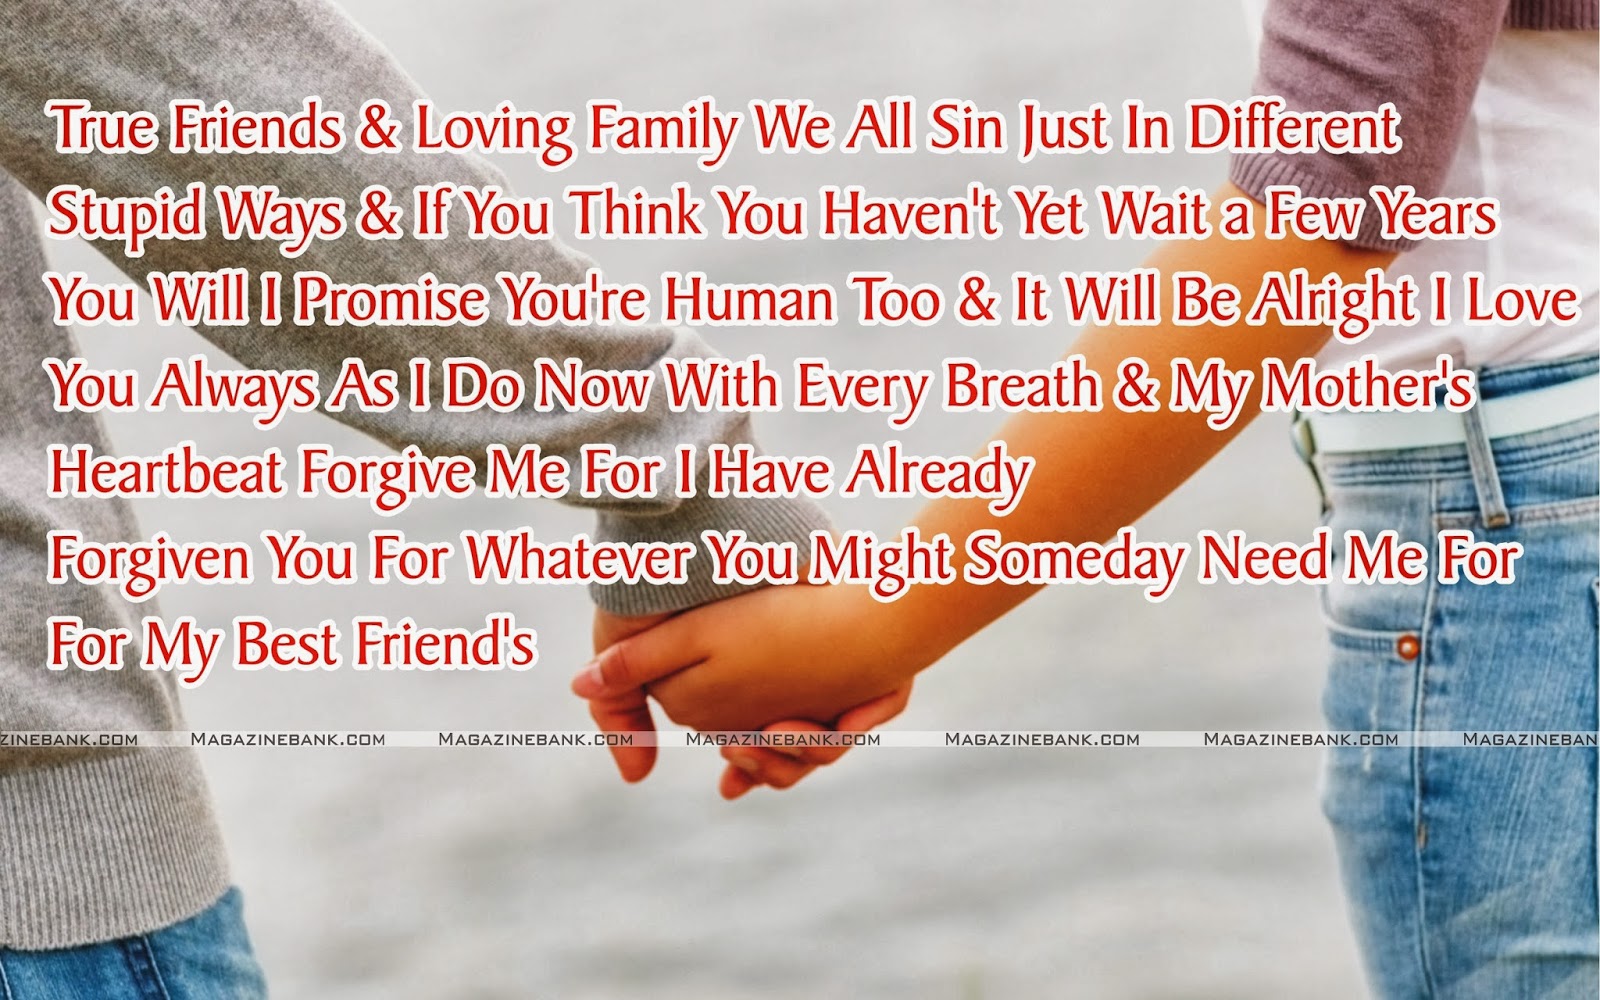 Friendship And Love Quotes And Sayings True love and friendship quotes quotesgram